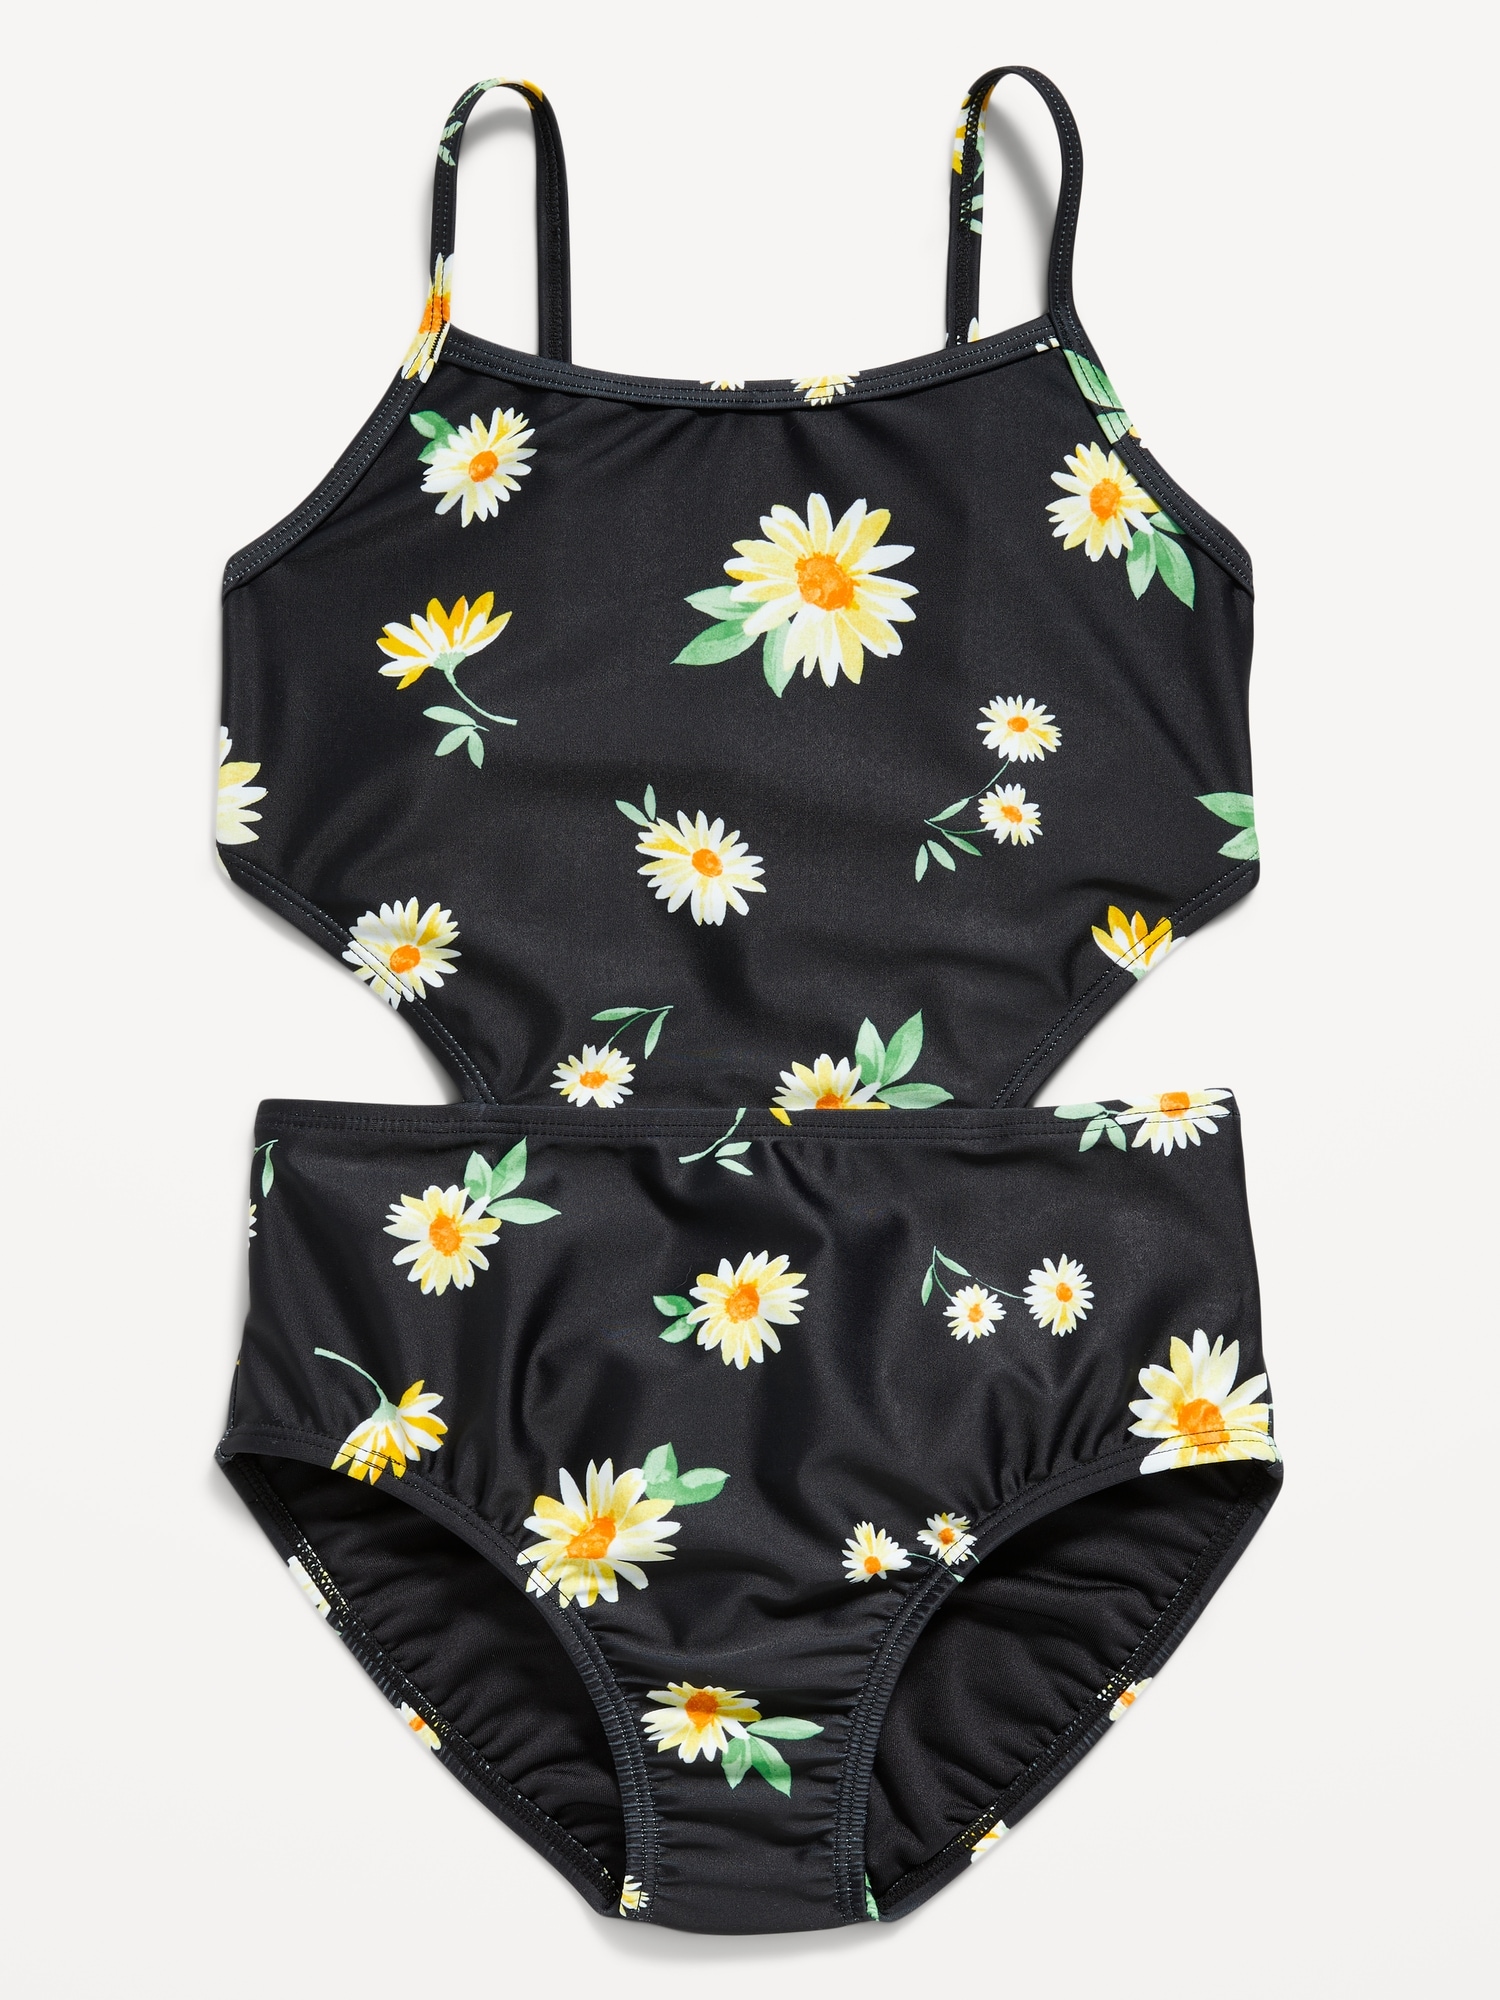 Old Navy Patterned Cut-Out-Waist One-Piece Swimsuit for Girls black. 1